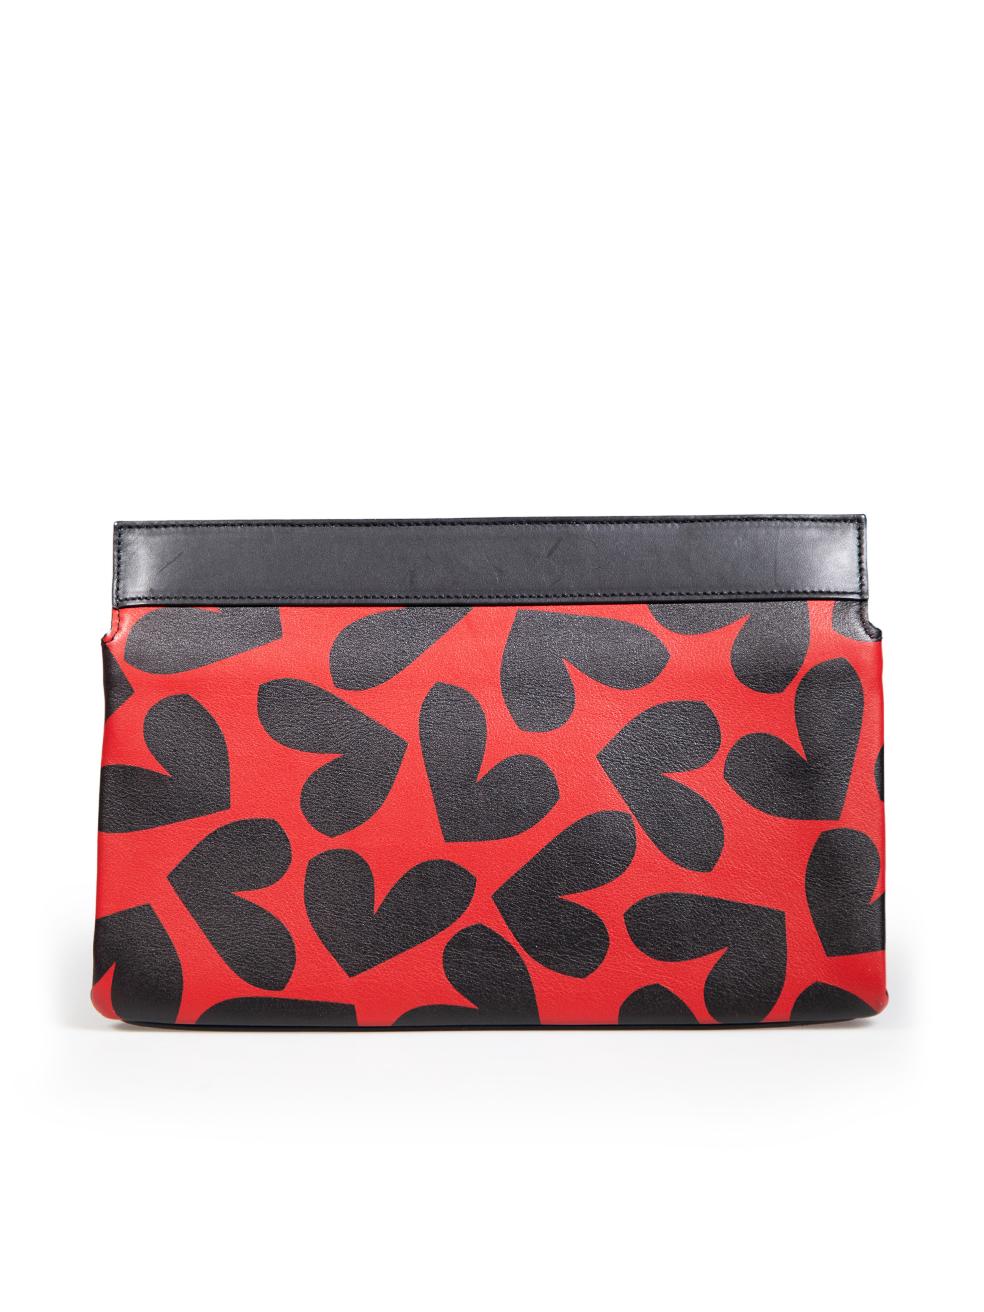 Saint Laurent Heart Printed Leather Clutch In Excellent Condition For Sale In London, GB